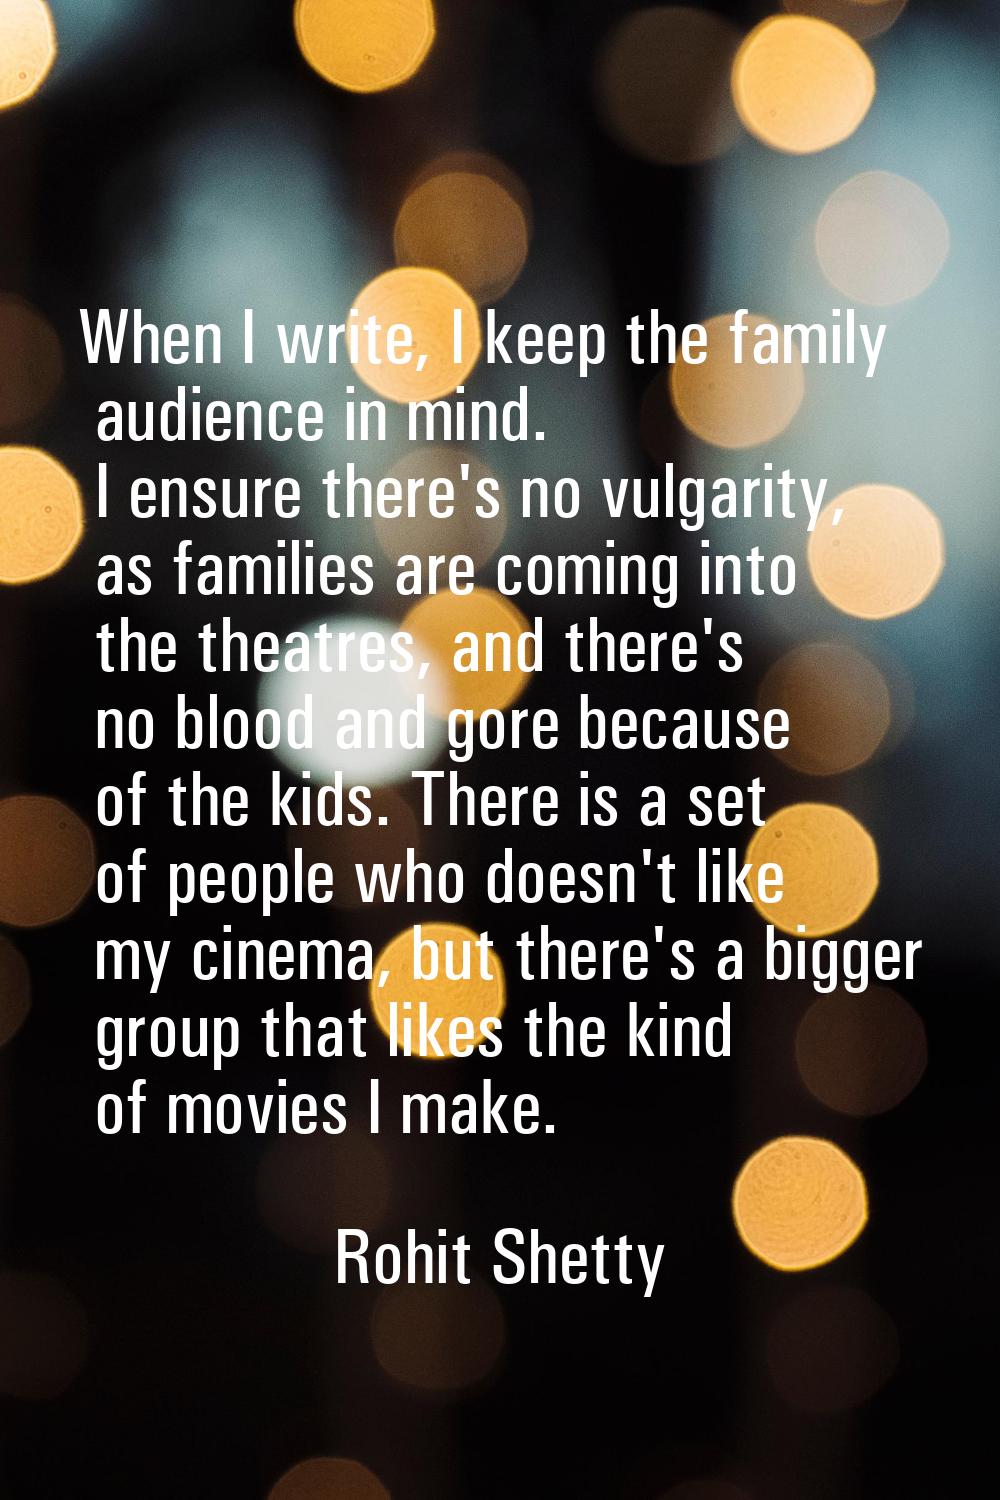 When I write, I keep the family audience in mind. I ensure there's no vulgarity, as families are co